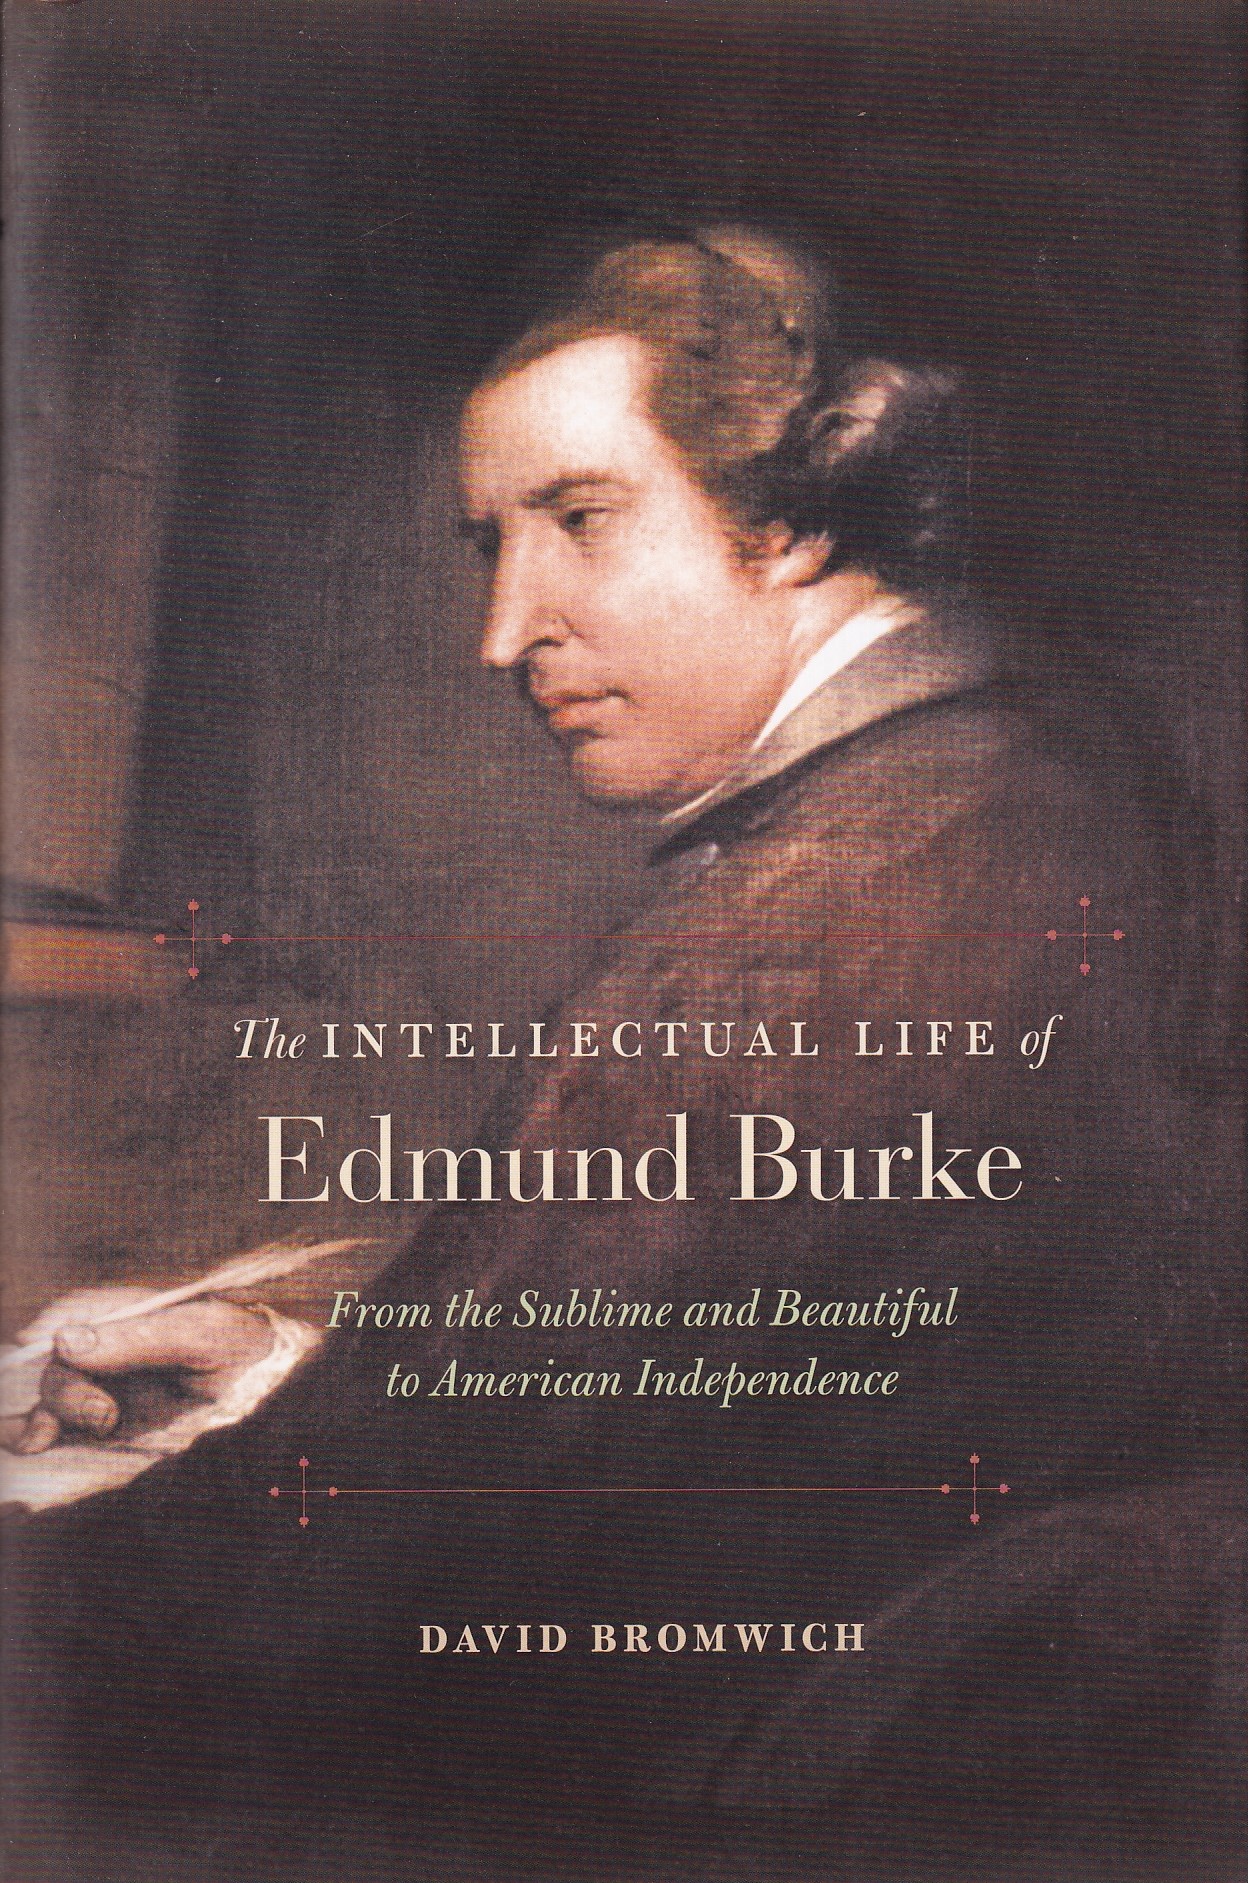 Intellectual Life of Edmund Burke: From the Sublime and Beautiful to American Independence | David Bromwich | Charlie Byrne's